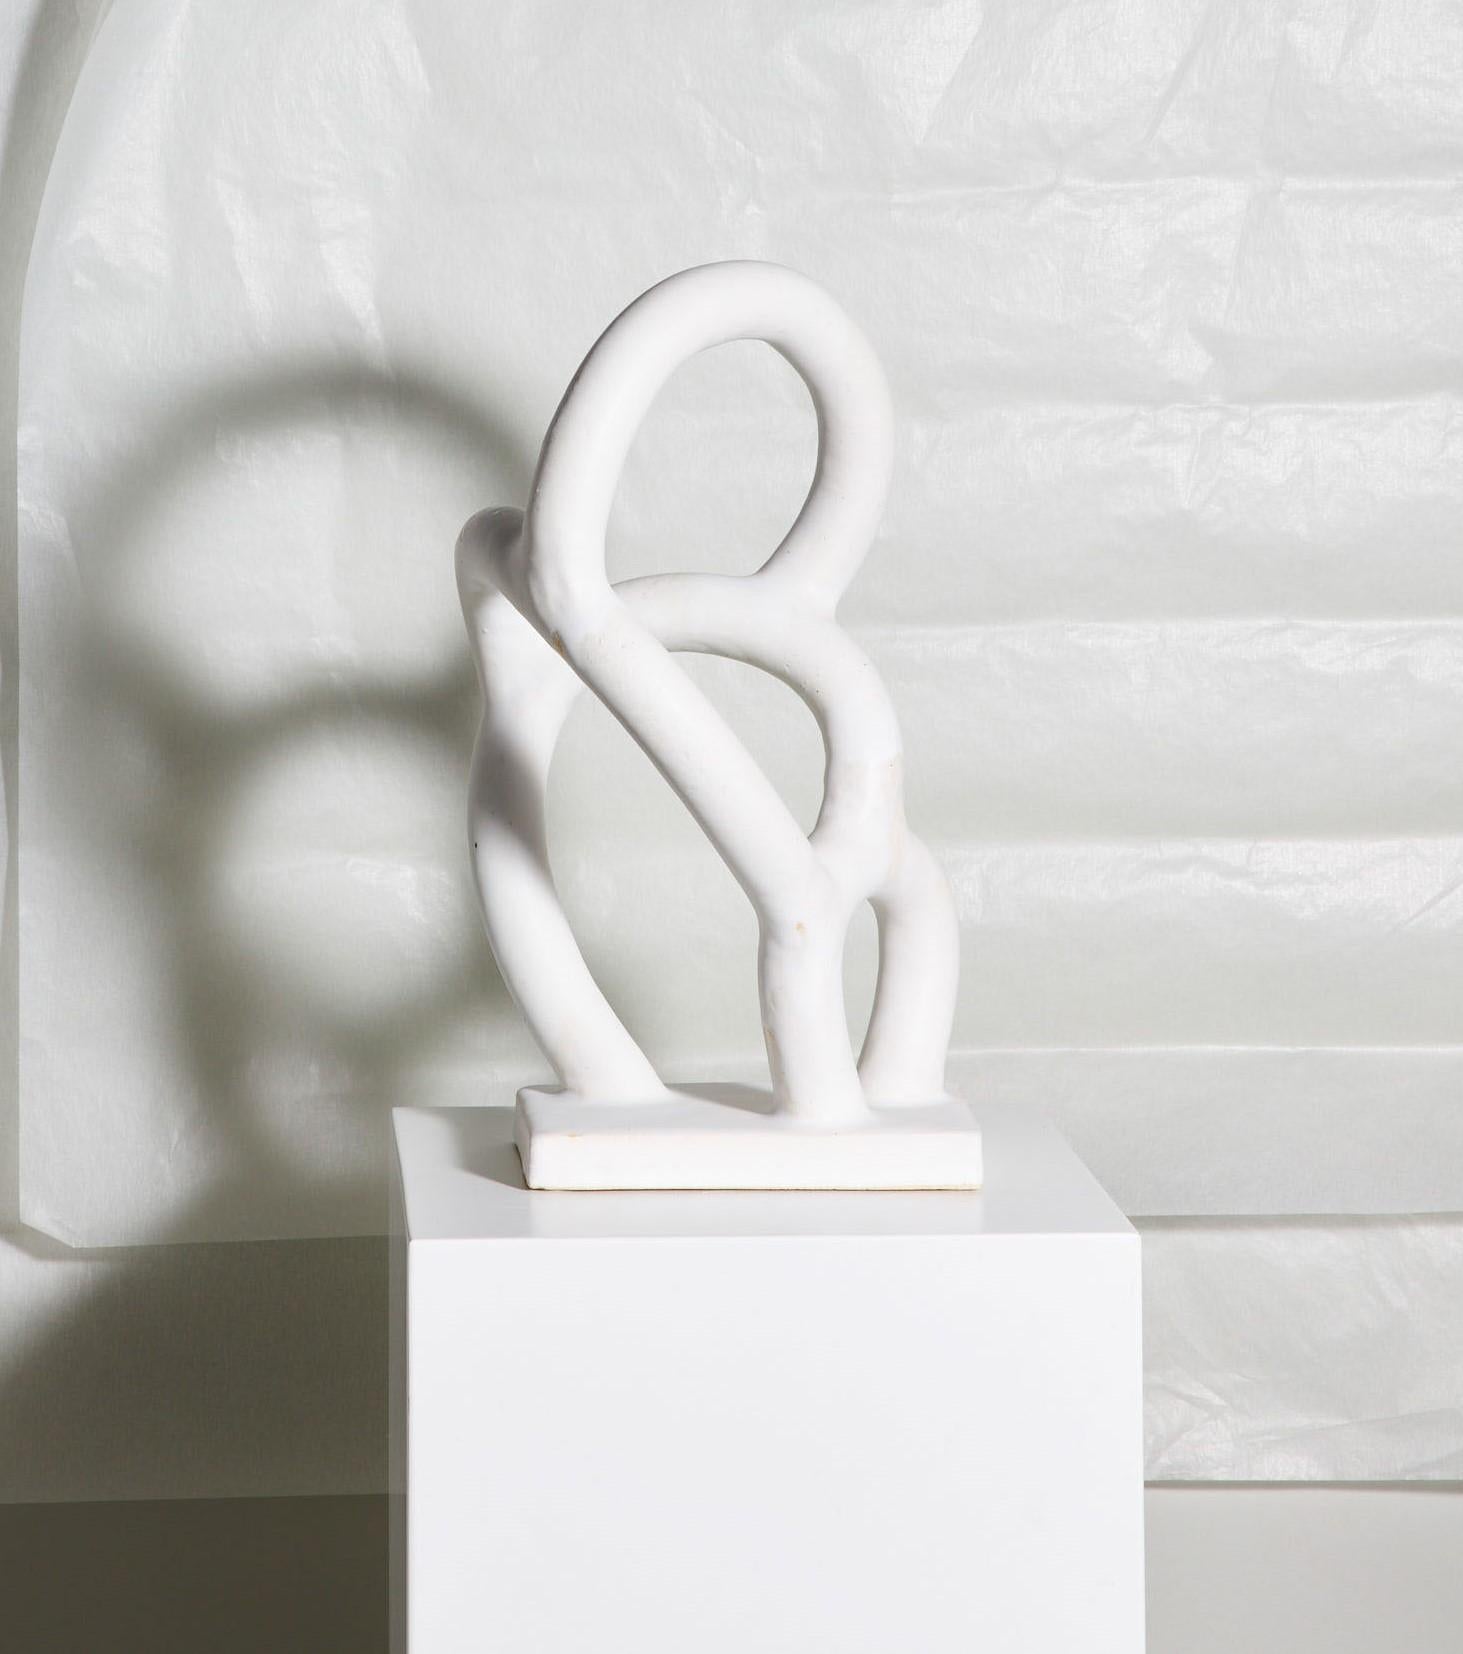 Balance sculpture I by Sophie Rogers
Dimensions: D 15x W 19 x H 35
Materials: Ceramic, glaze
Other glaze colors available.

The inspiration comes from exploration with balance where the light and shadows can take place in an elegant